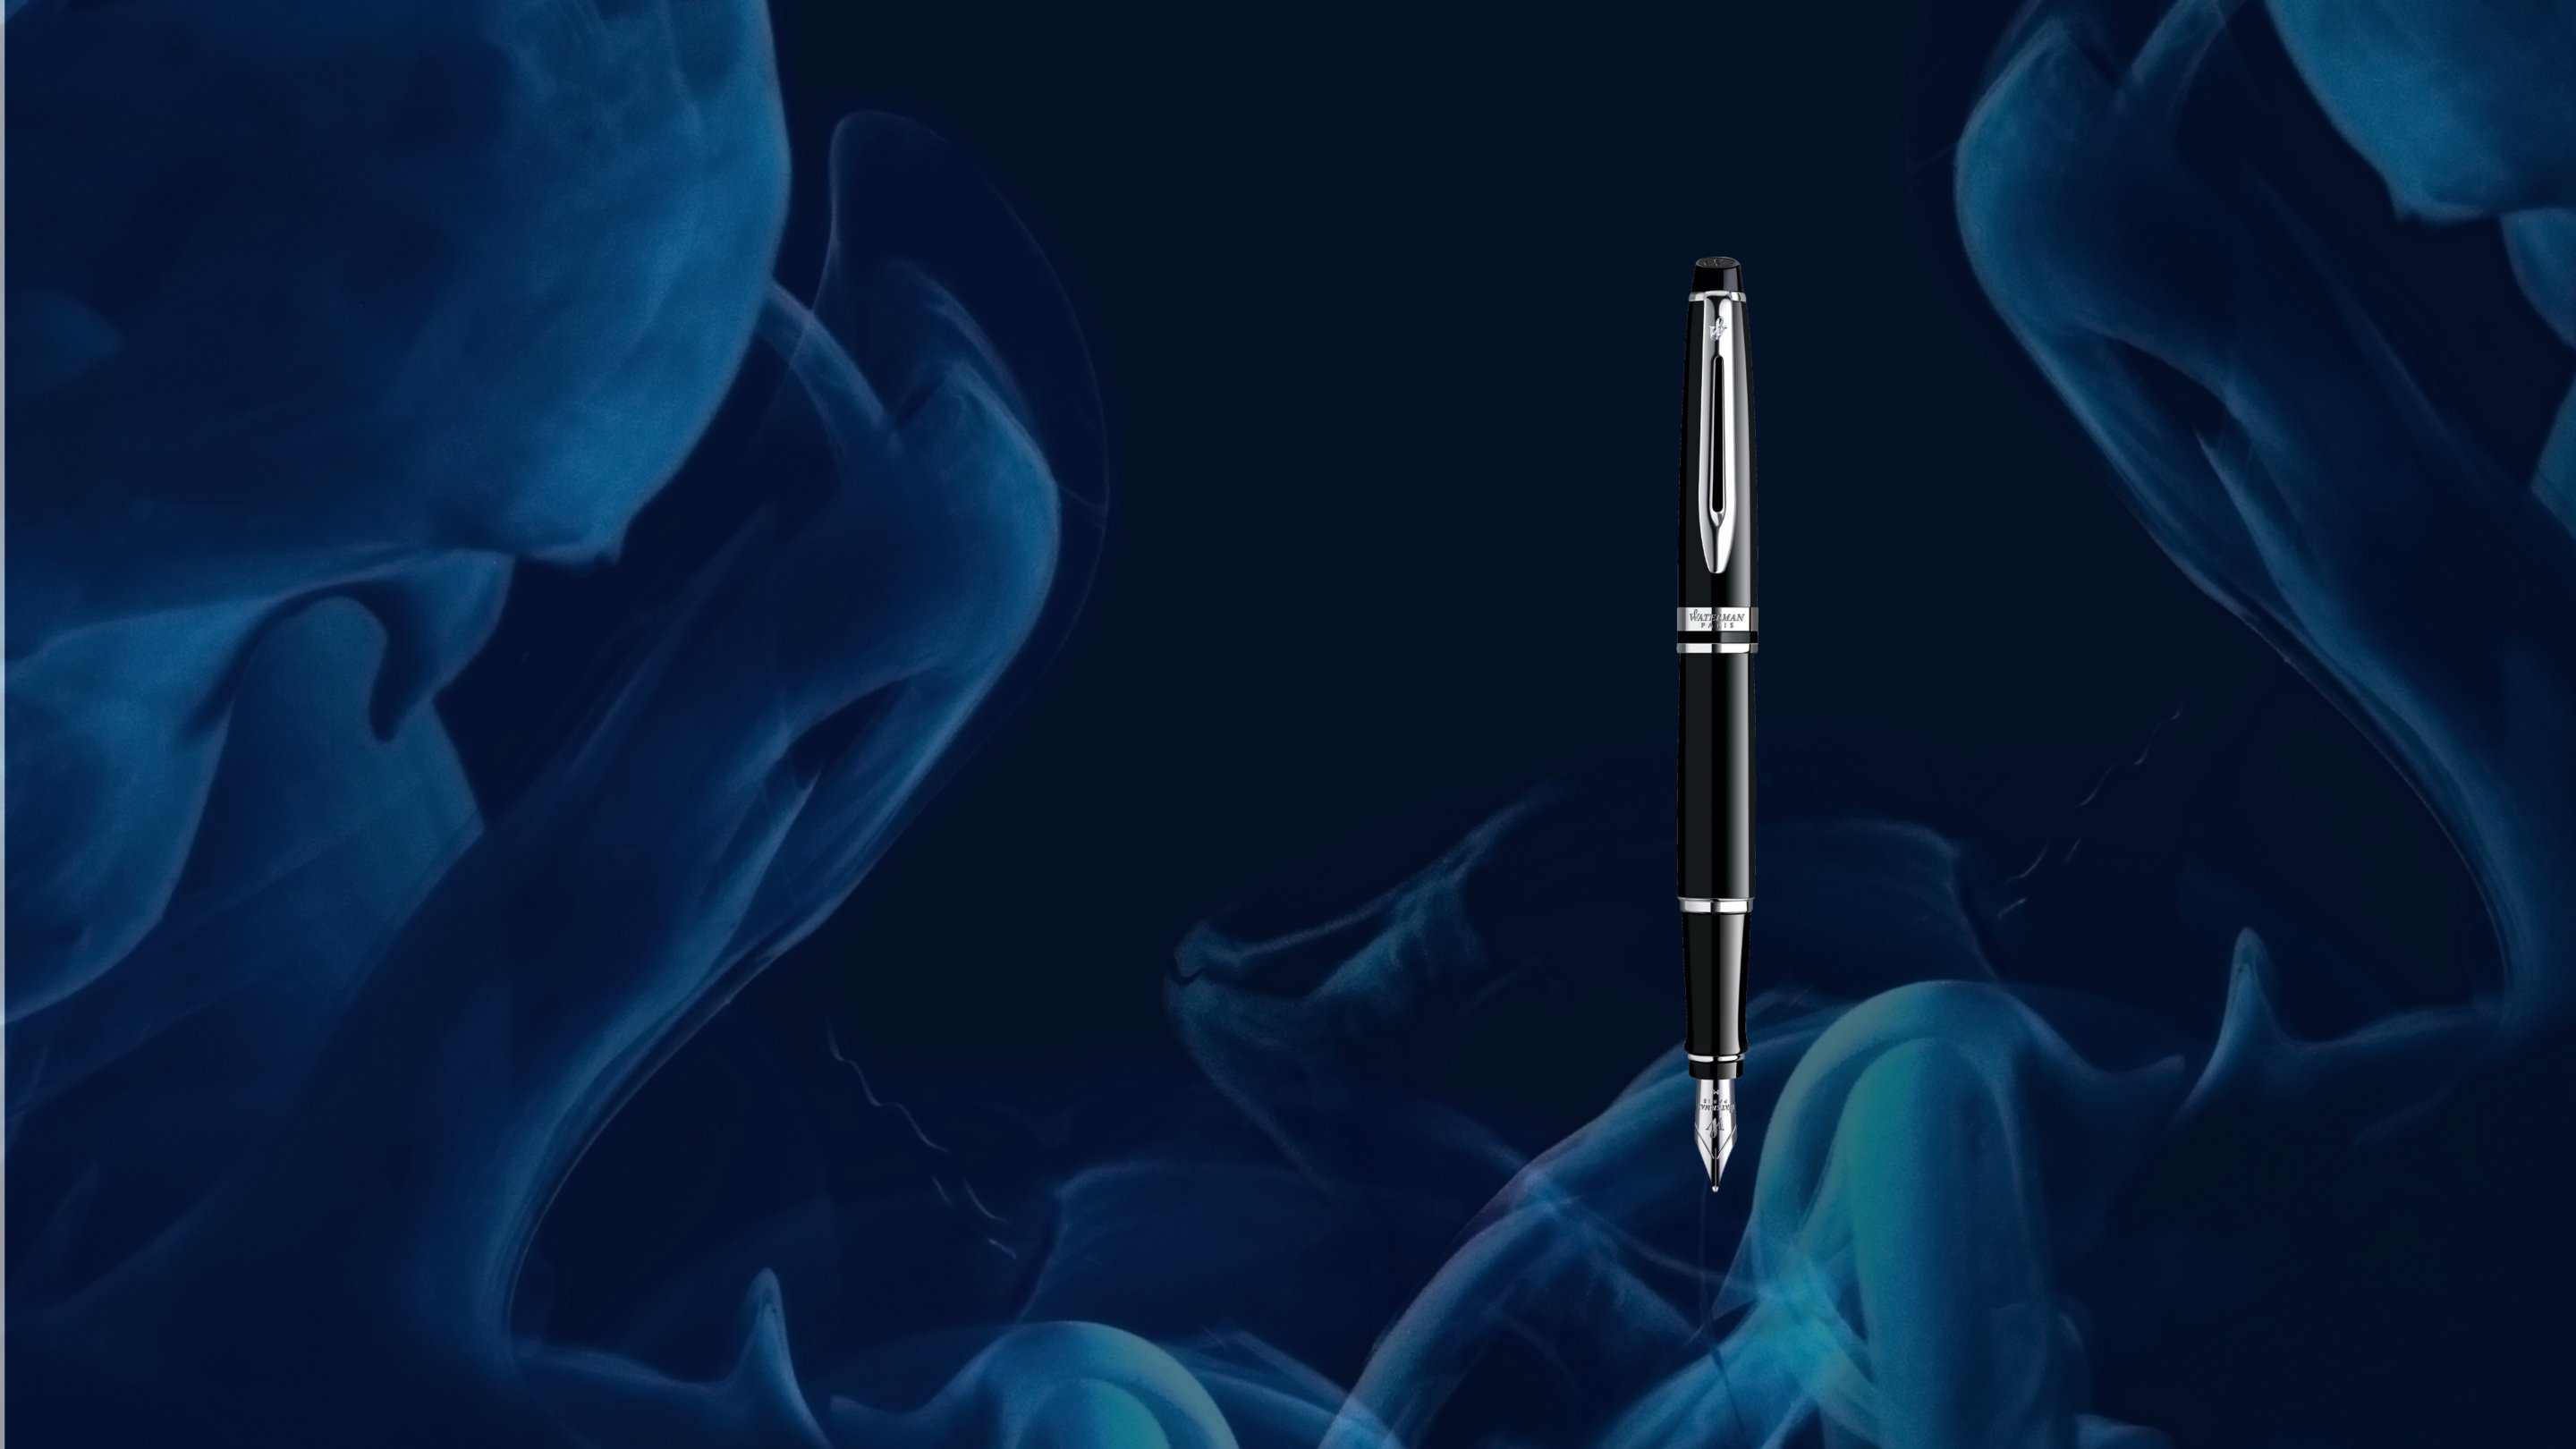 An upright Expert fountain pen in front of a smoky background.